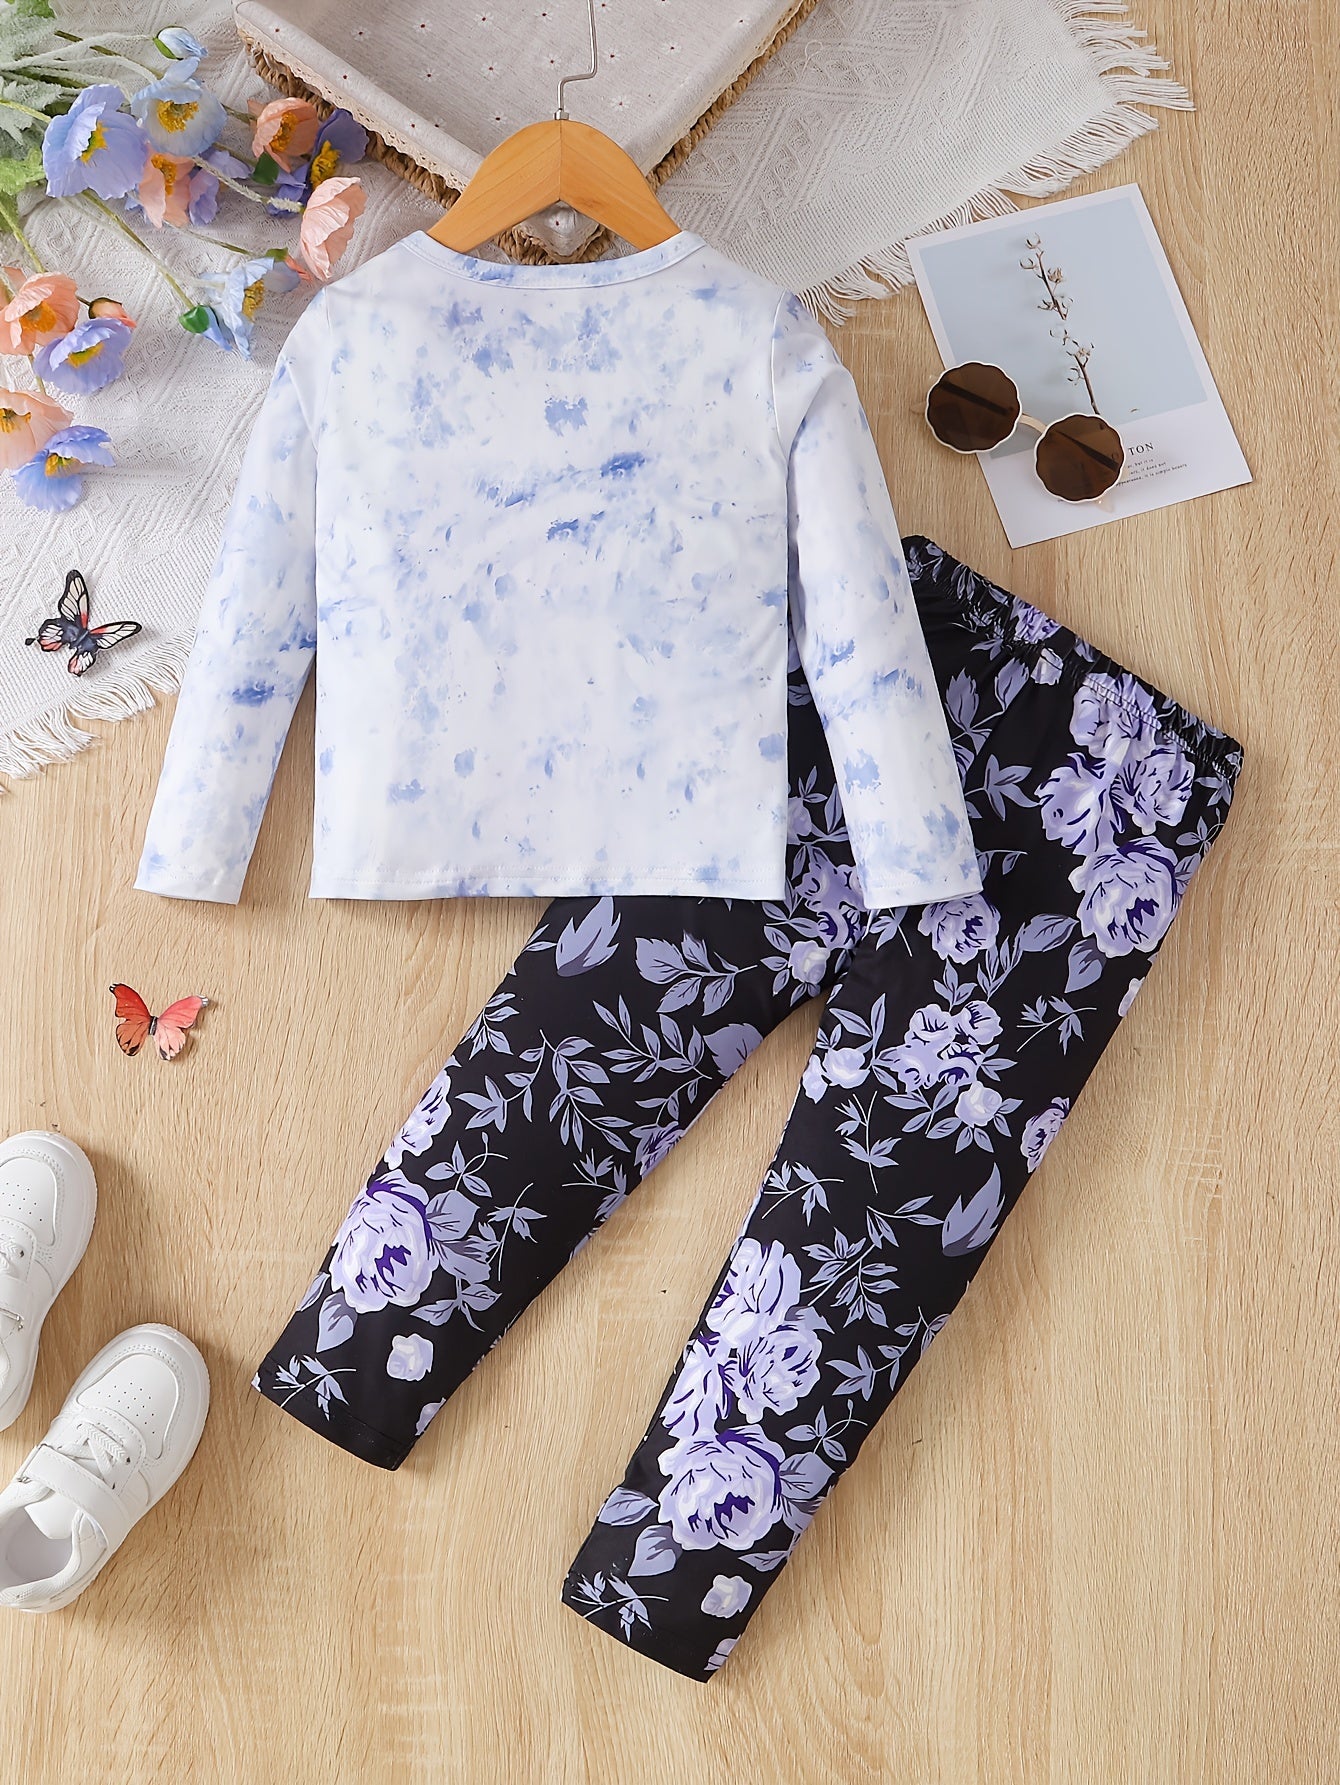 Girl's Butterfly Graphic Outfit 2pcs, Long Sleeve Top & Floral Pattern Pants Set, DREAMS Print Kid's Clothes For Spring Fall